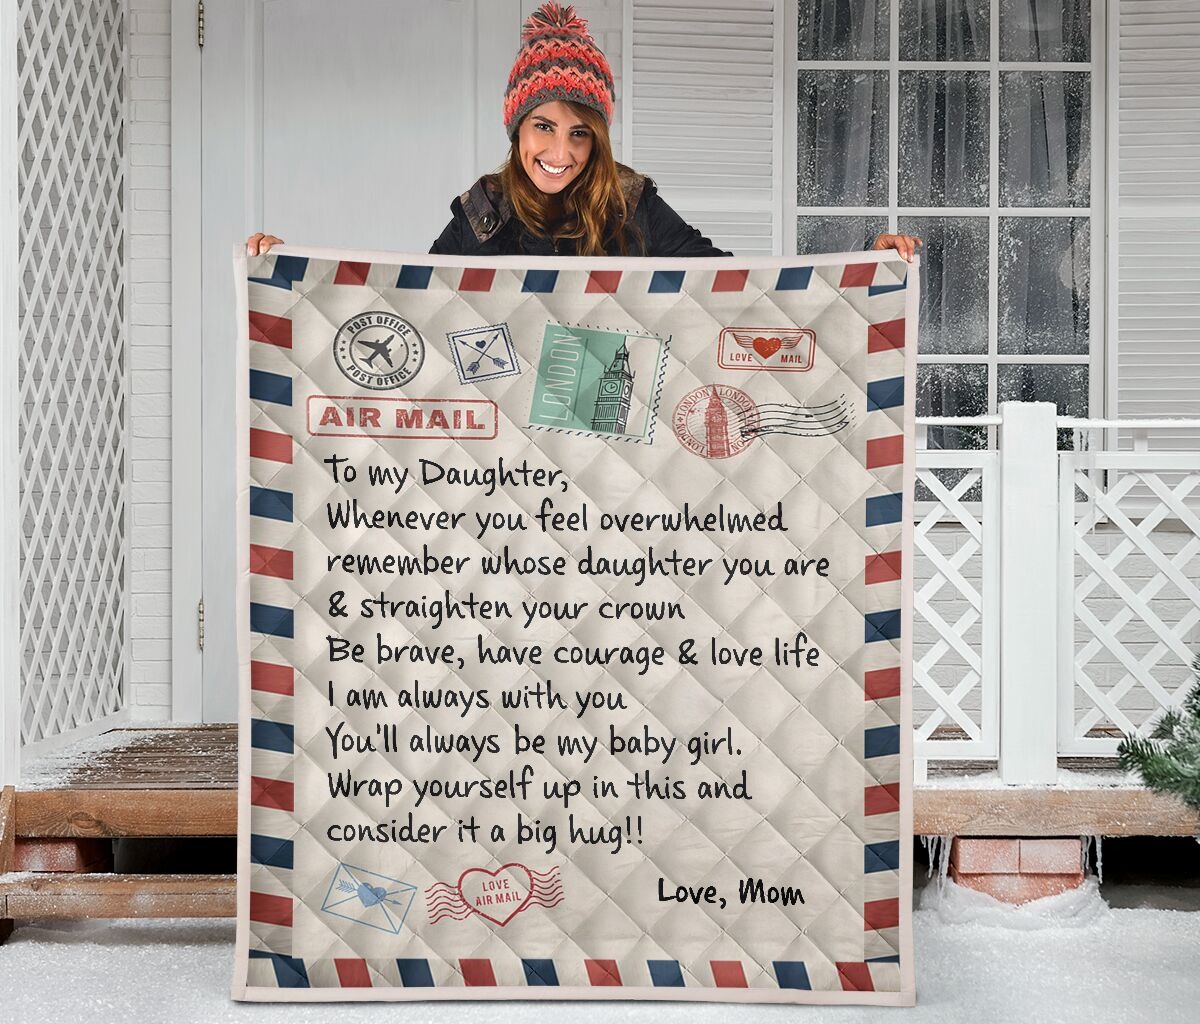 Air mail to my daughter whenever you feel overwhelmed quilt 2